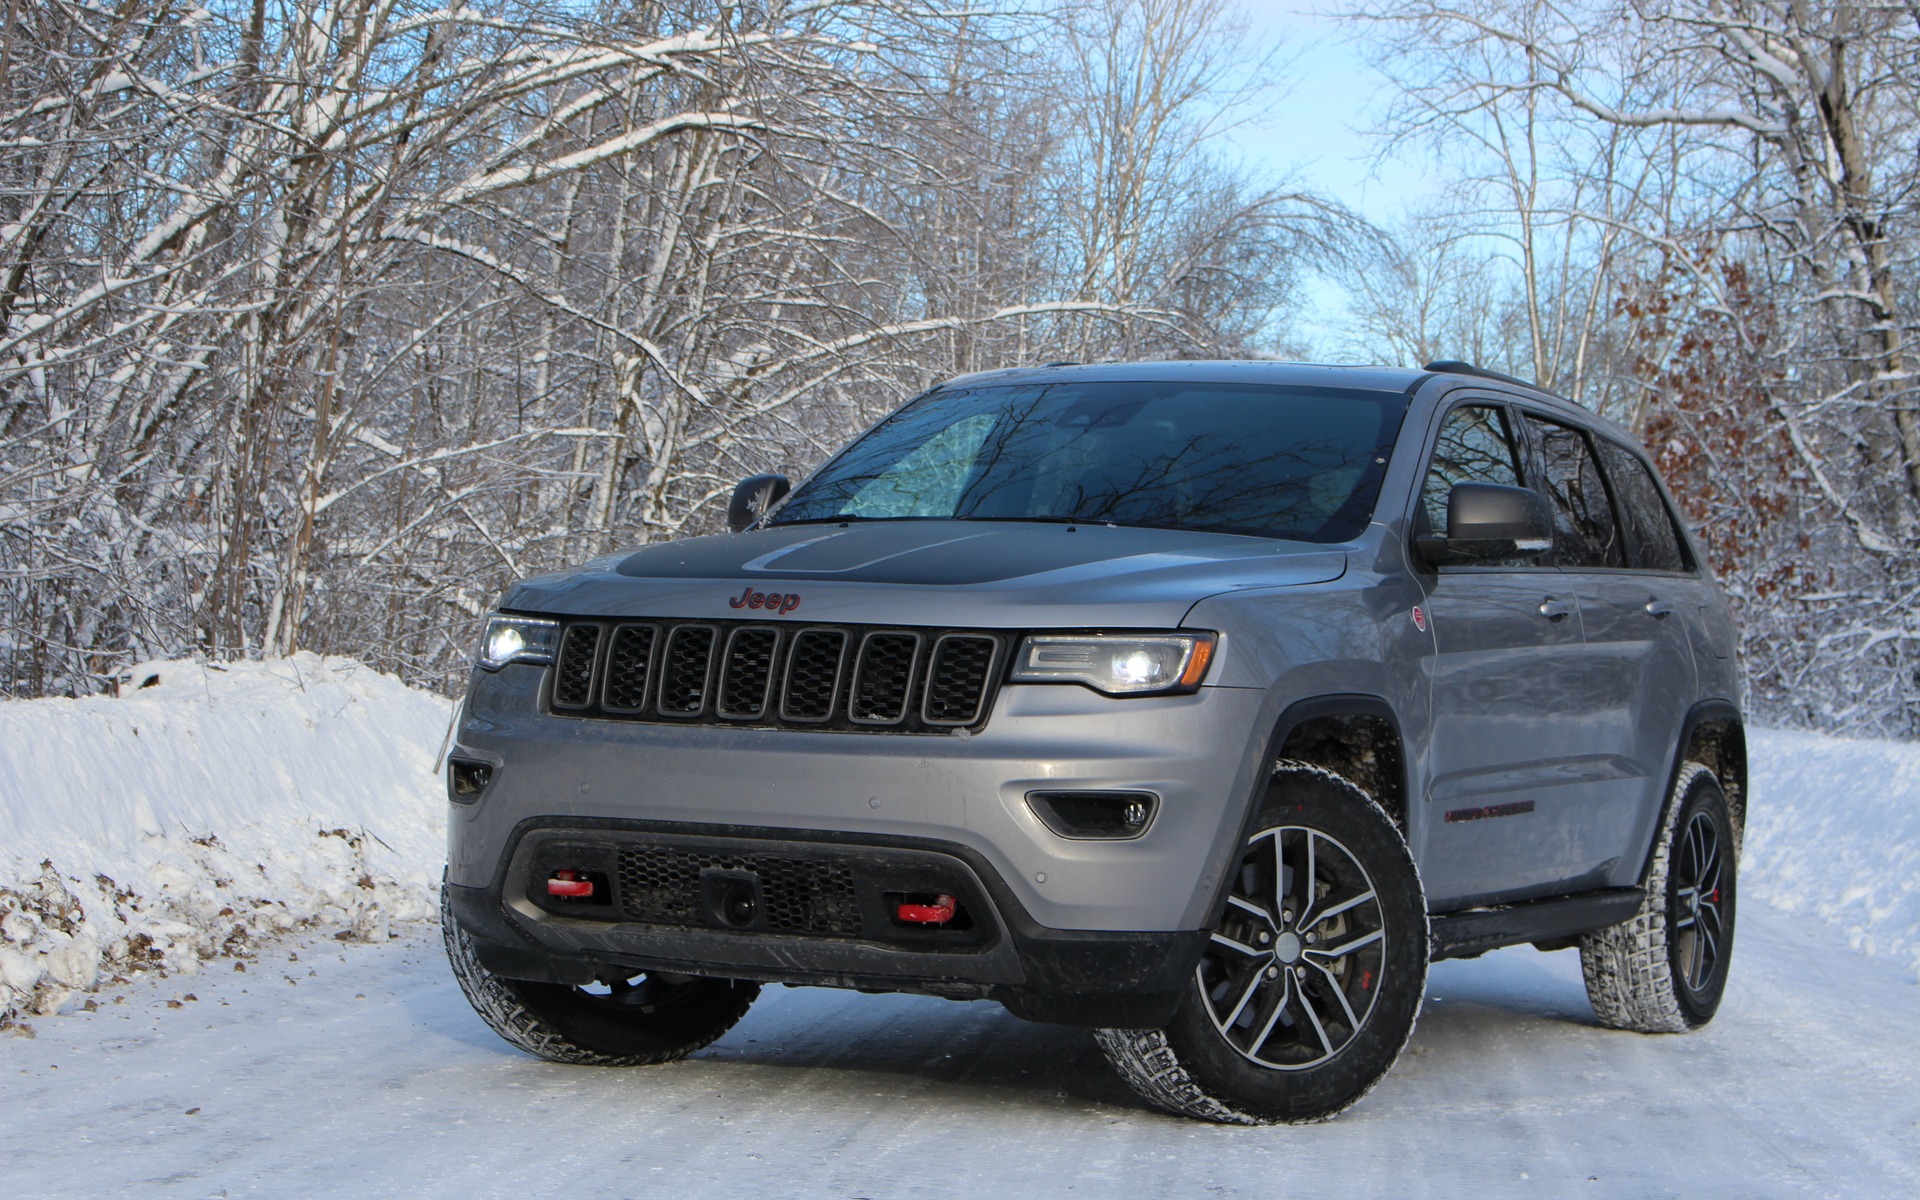 2017 Jeep Grand Cherokee Trailhawk: The Adventurous Type - The Car Guide